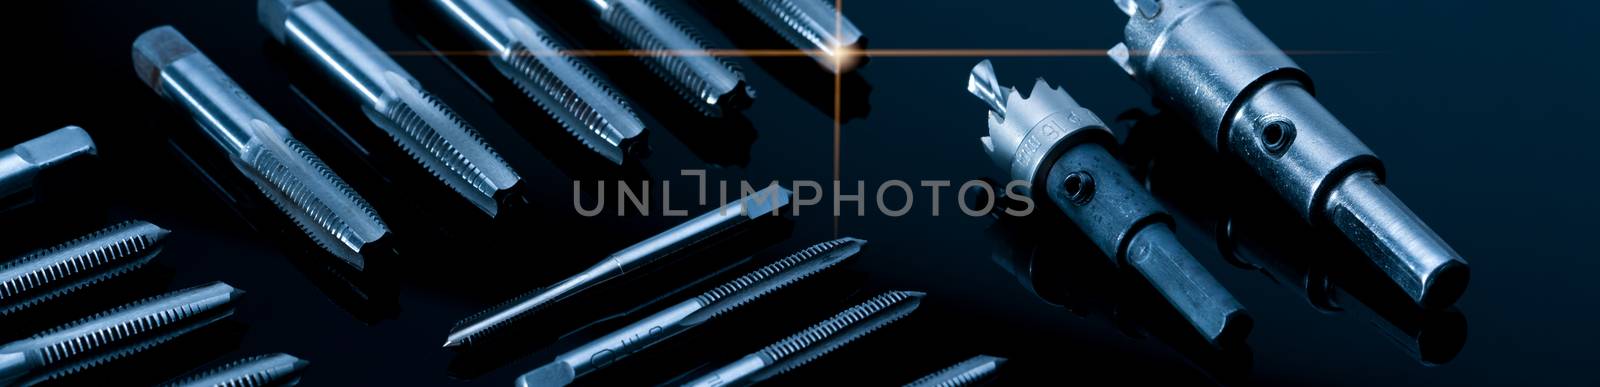 Closeup straight flute tap tip and hole saw on dark background.  Industrial tapping tools. Carbide tip metal cutter. Metalworking hardware. Mechanic tools. Drilling equipment. Mechanical engineering. 